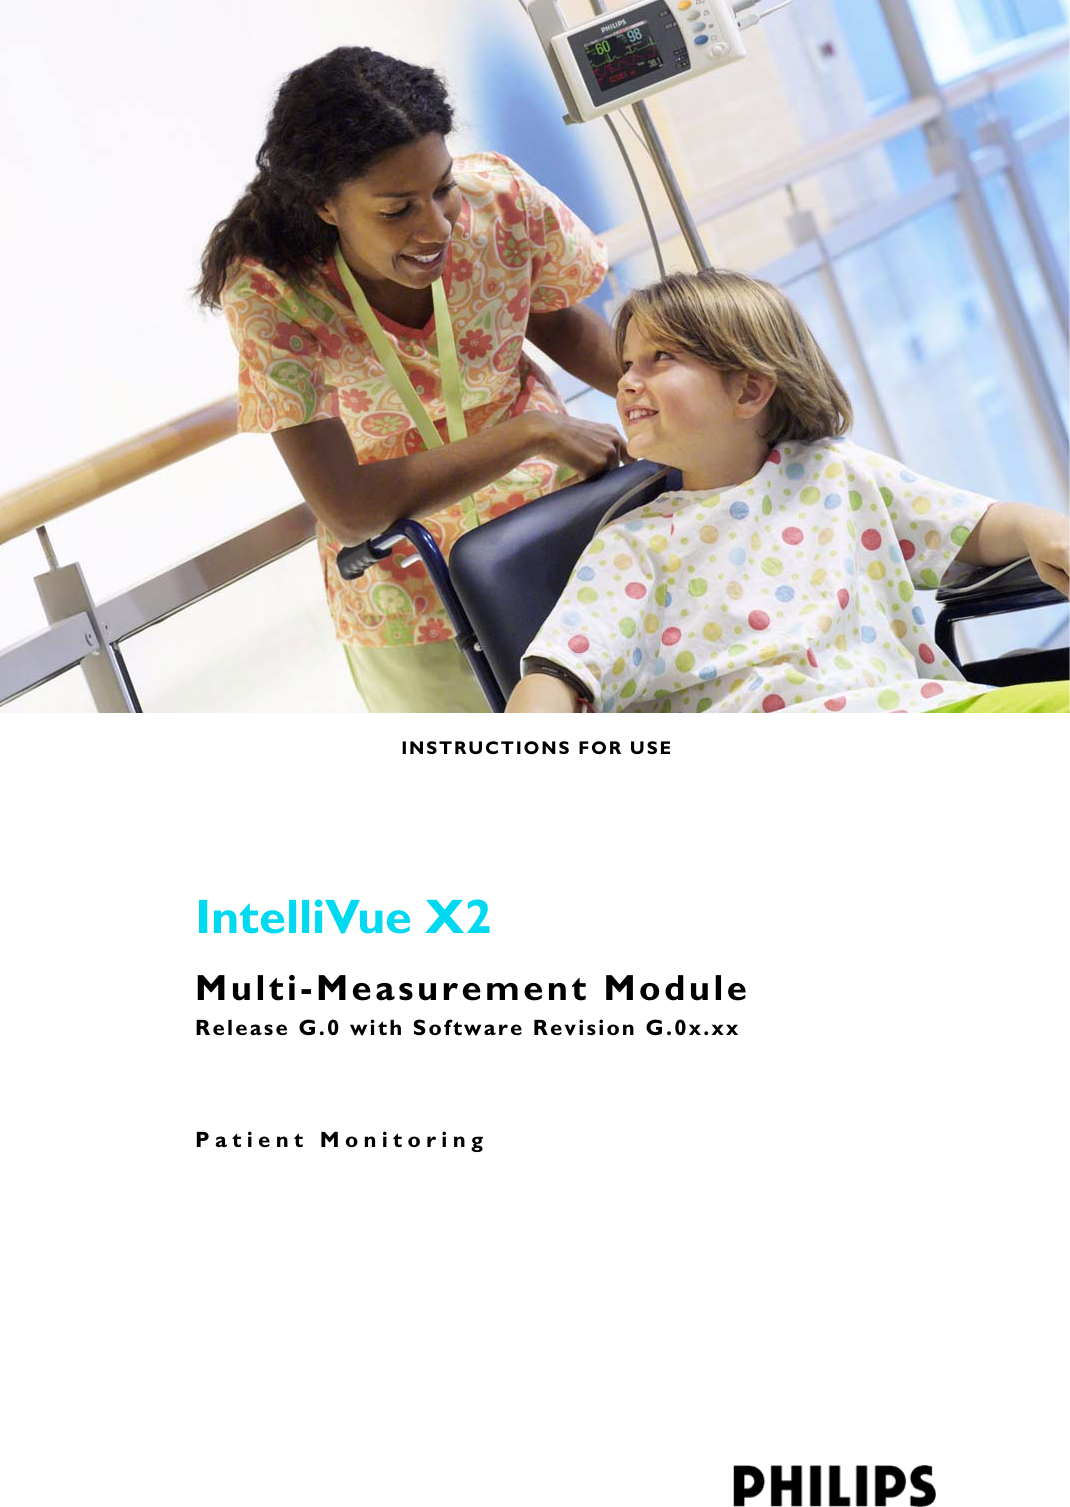 Patient MonitoringINSTRUCTIONS FOR USEIntelliVue X2Multi-Measurement ModuleRelease G.0 with Software Revision G.0x.xx